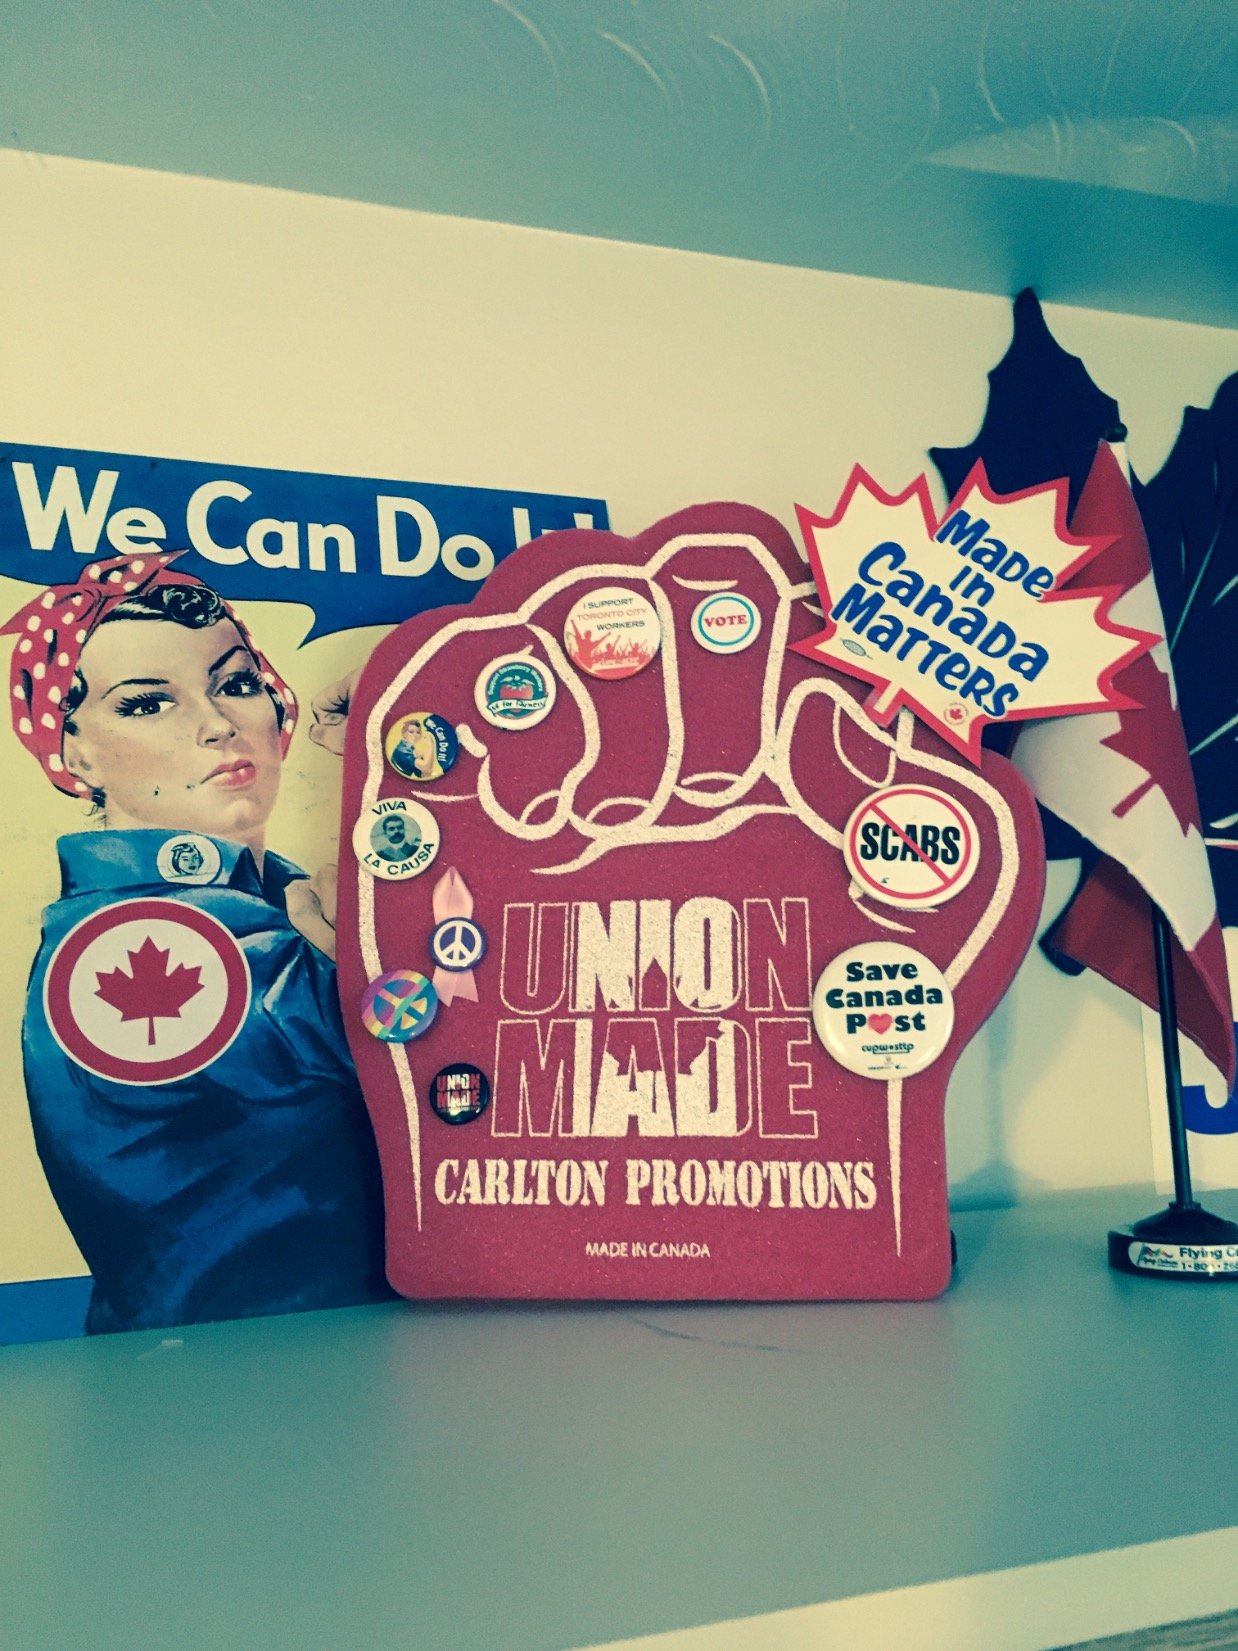 At Carlton Promotions we specialize in providing you with innovative Union Made Products to fit your promotional objectives
416-385-7360 for pricing &inquiries!